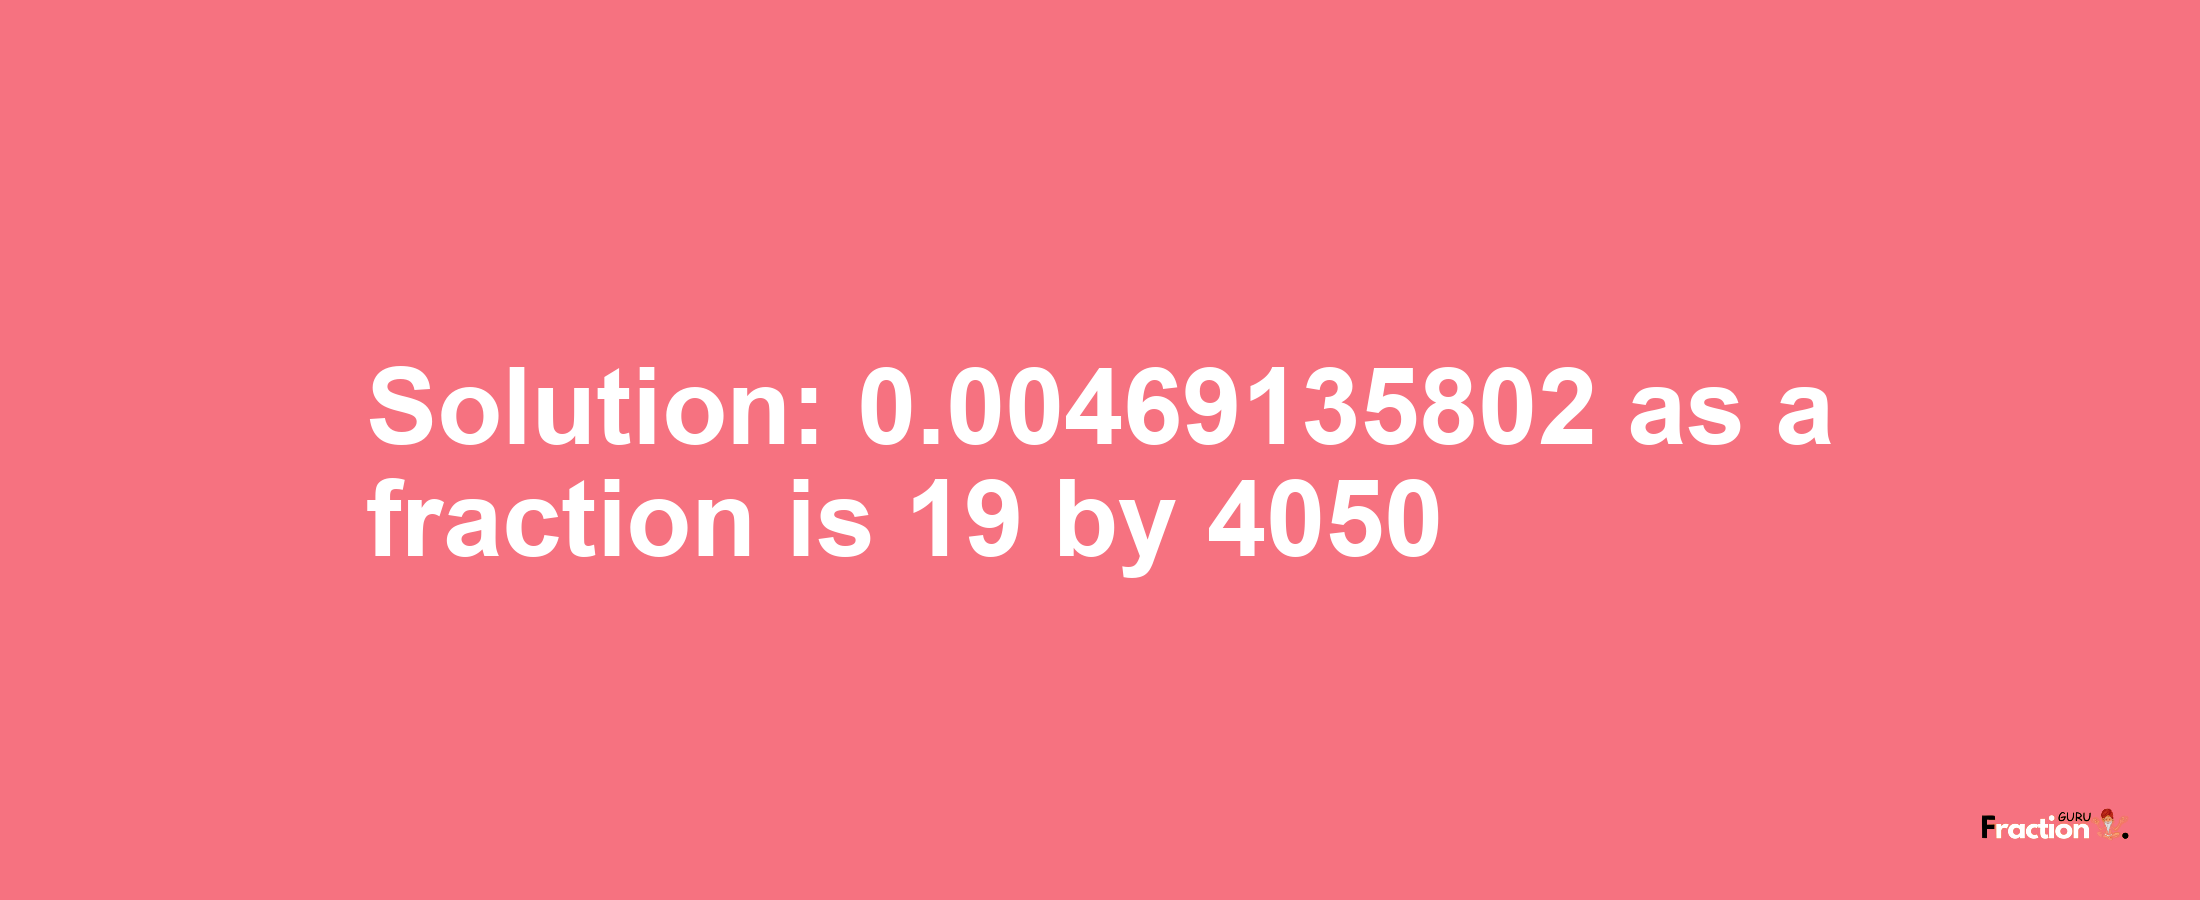 Solution:0.00469135802 as a fraction is 19/4050